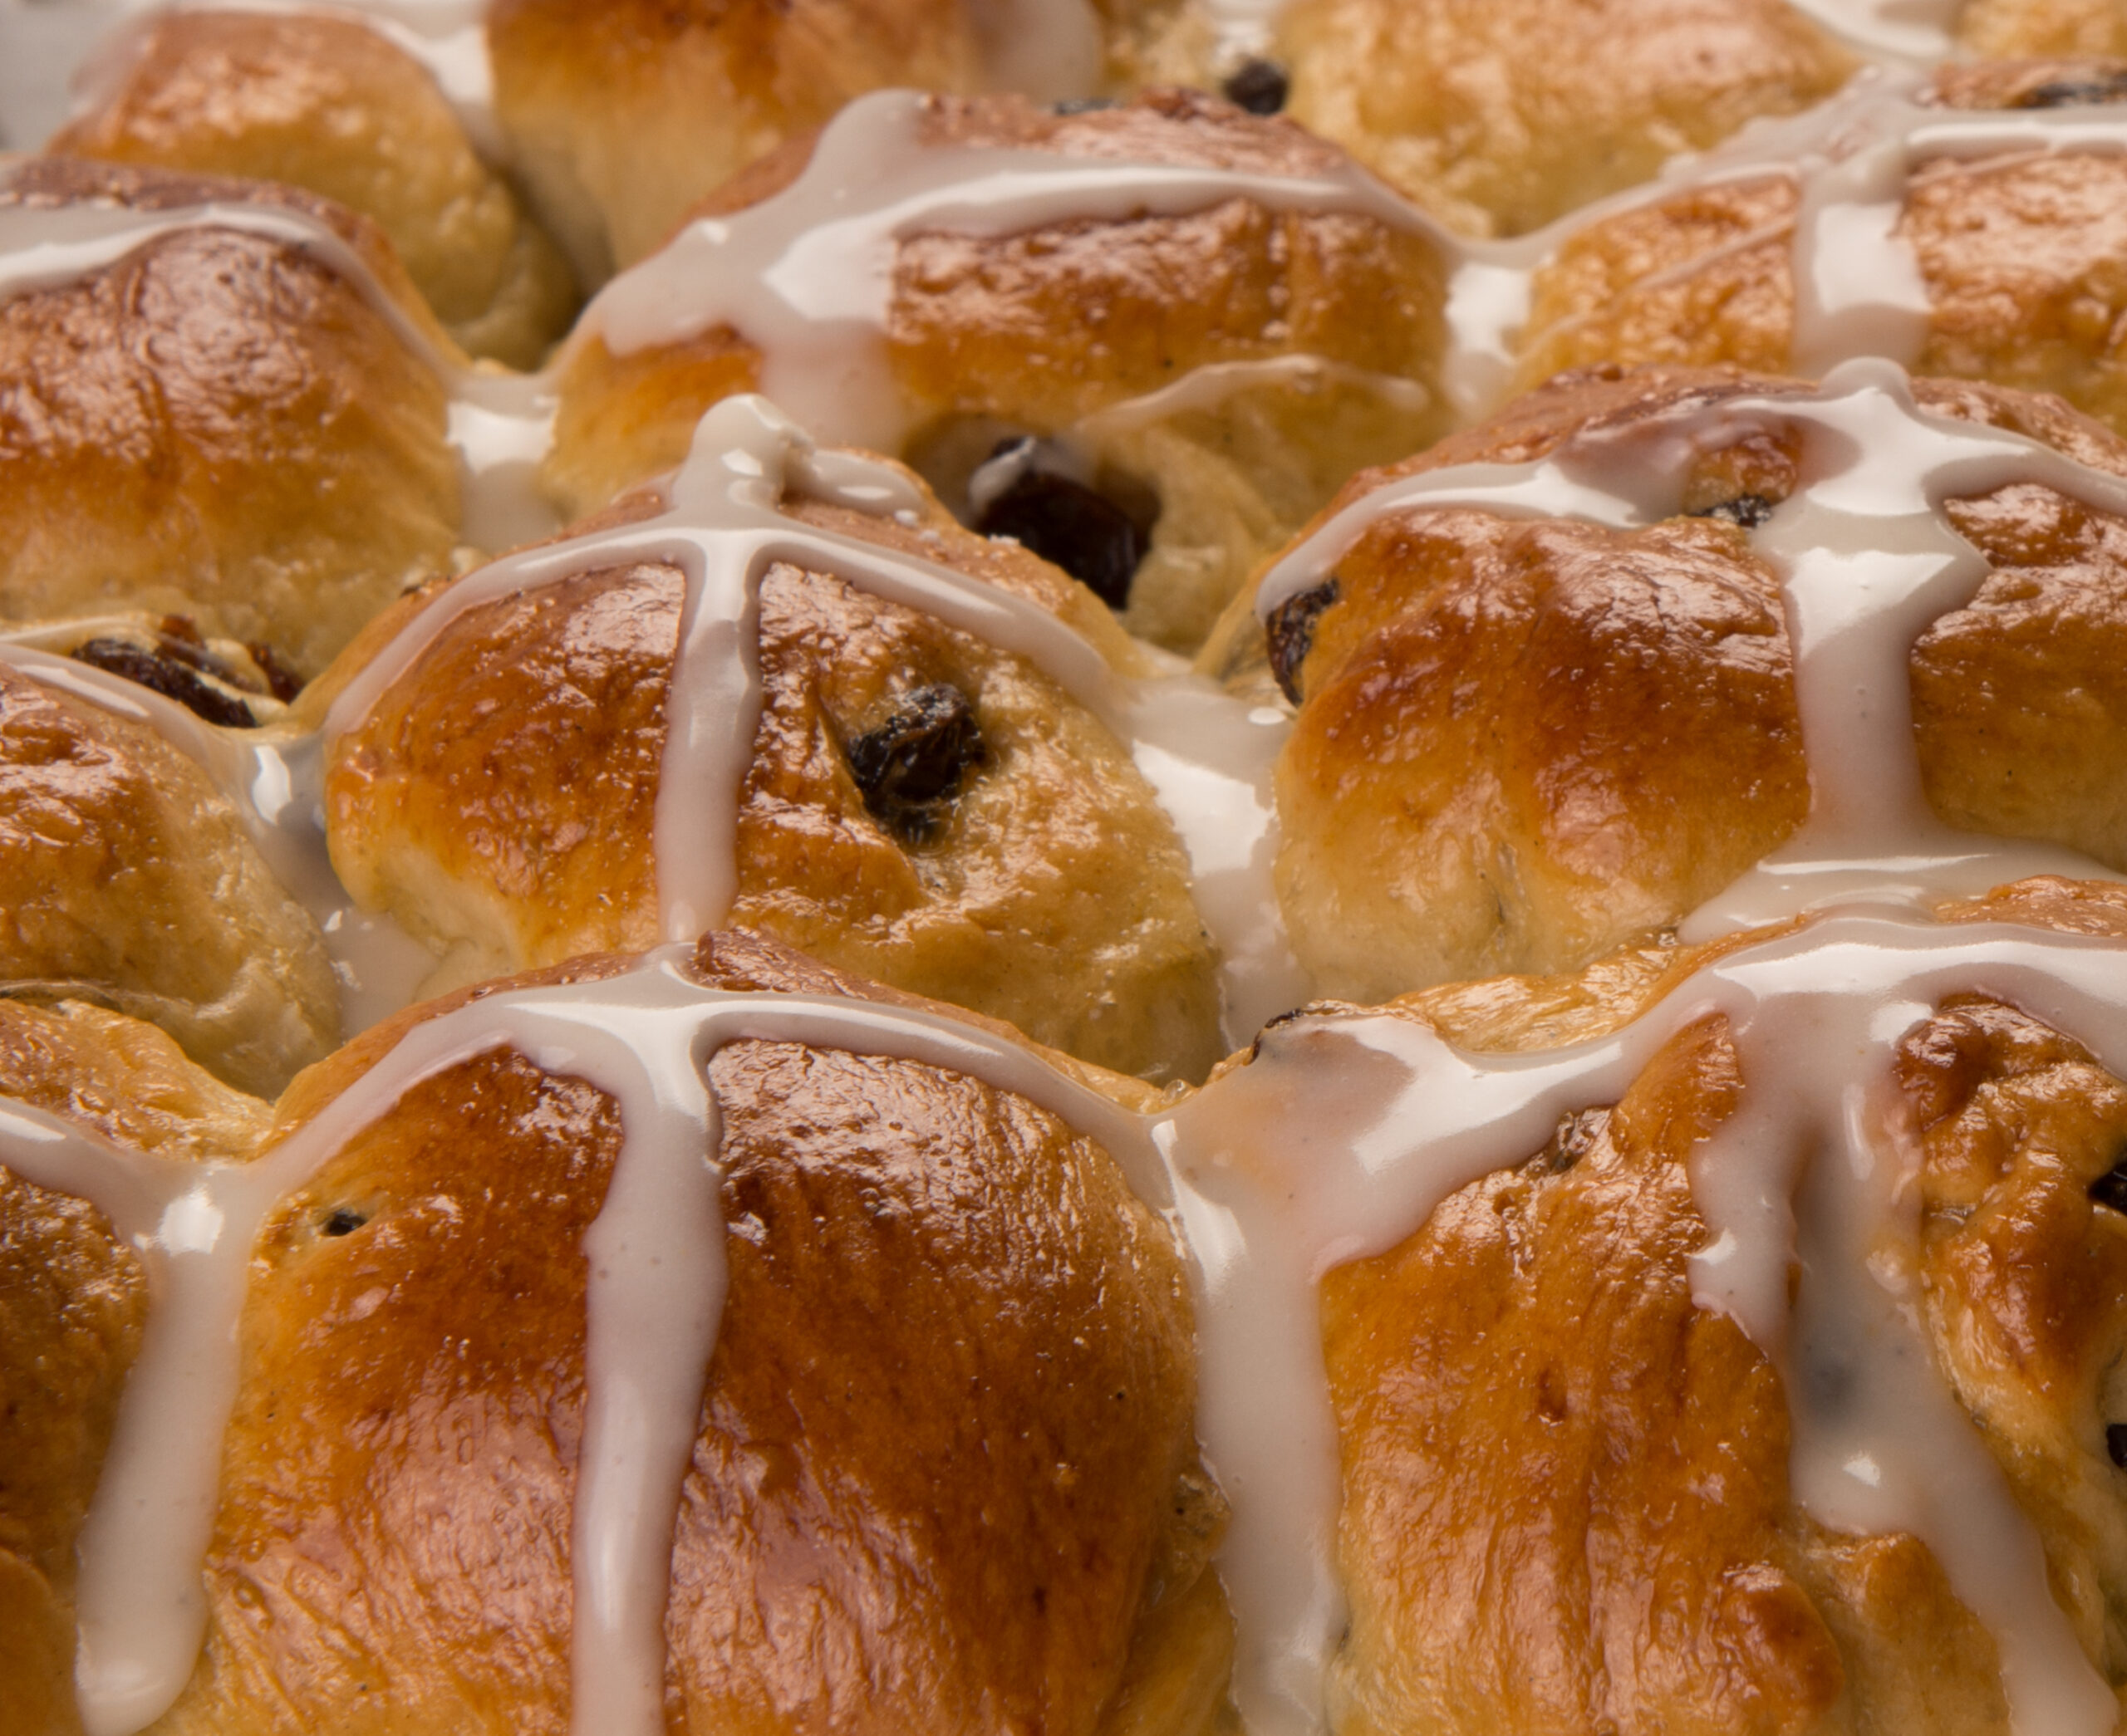 Oldies But Goodies: Hot Cross Buns